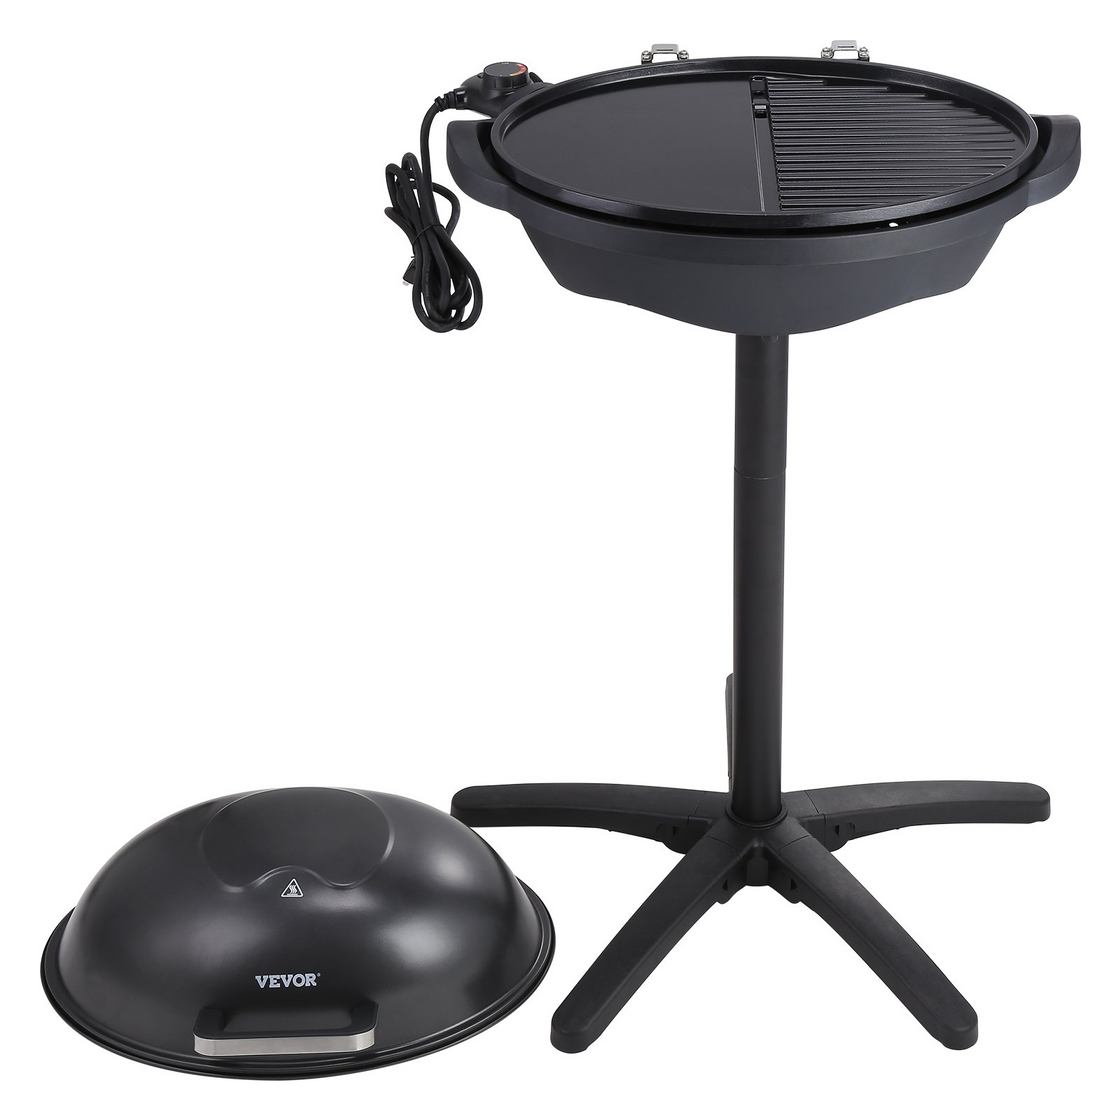 VEVOR Indoor/Outdoor Electric Grill, 1800W 200sq.in Electric BBQ Grill with Zone Grilling Surface, Removable Stand, Non-stick Patio Grill with Adjustable Temperature for Party Camping Yard